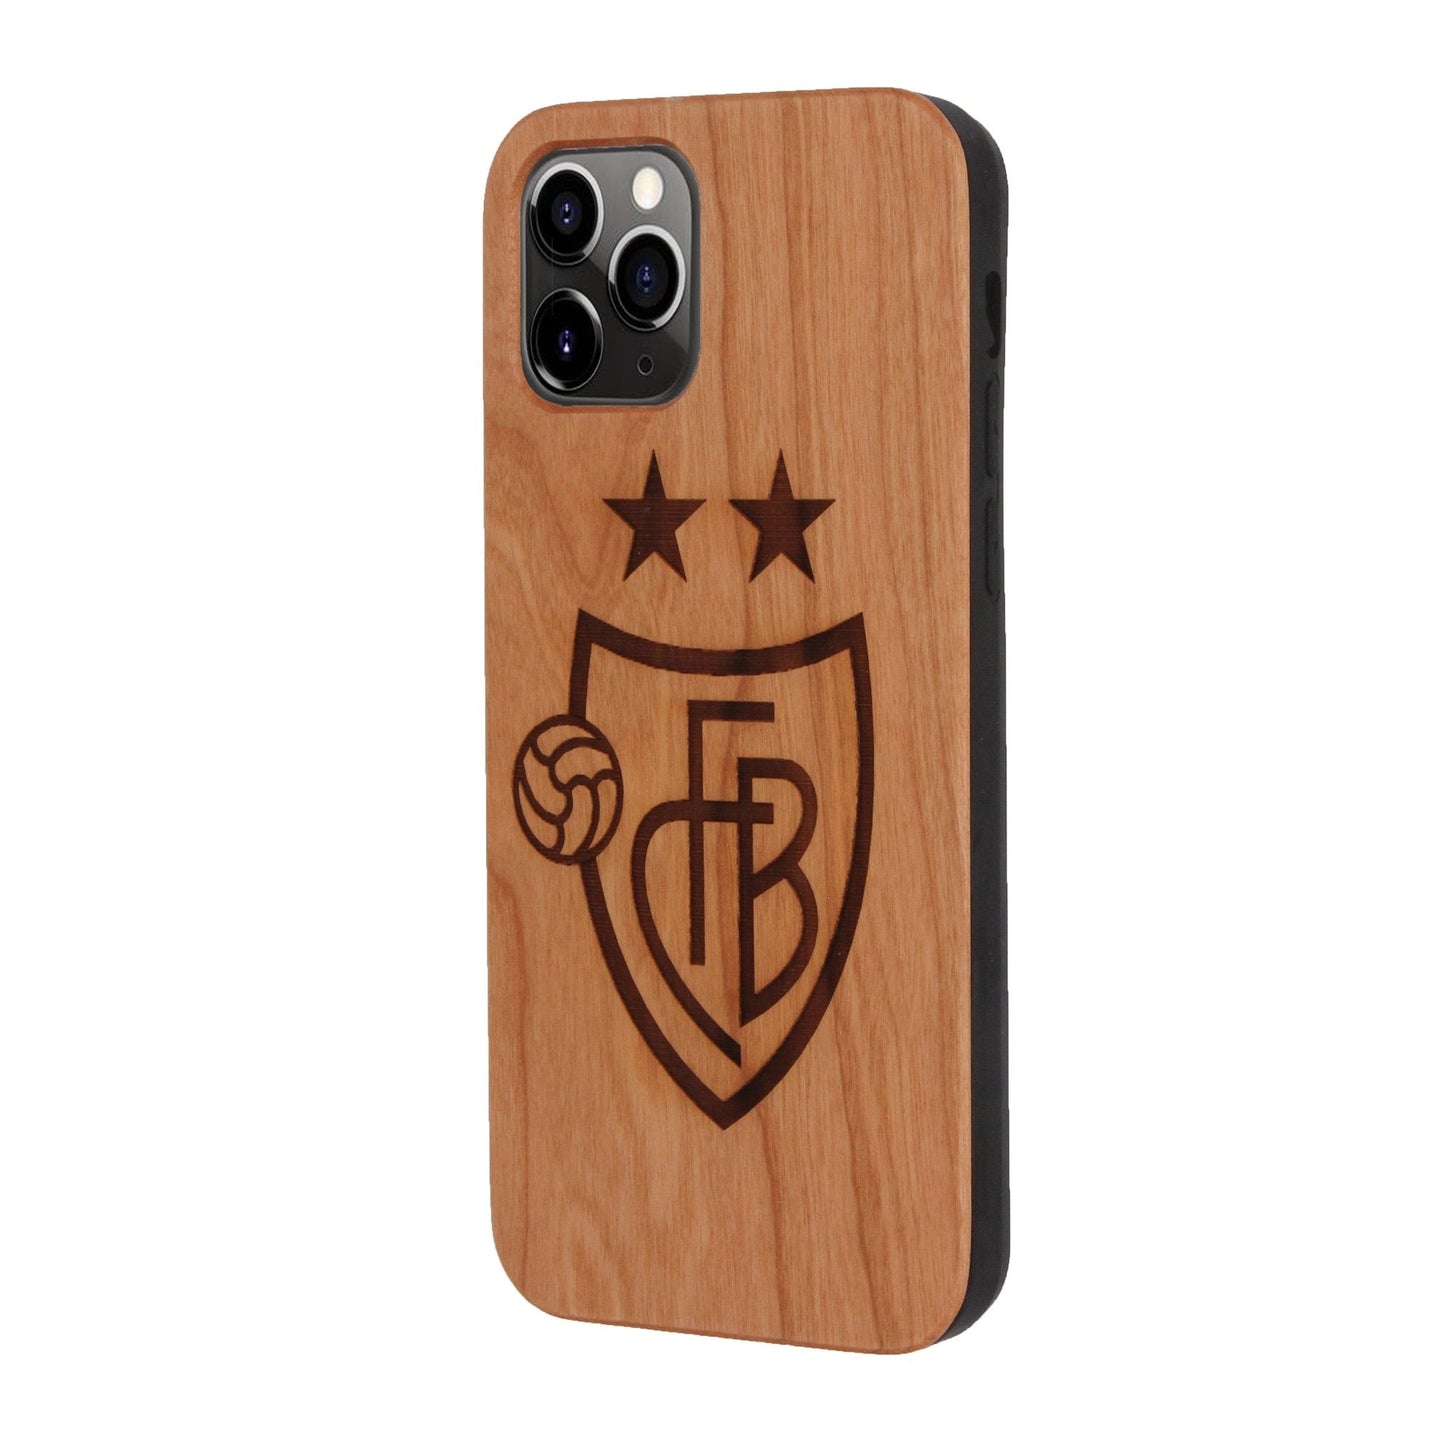 FCB Eden Cherry Wood Case for iPhone 11 Pro Max